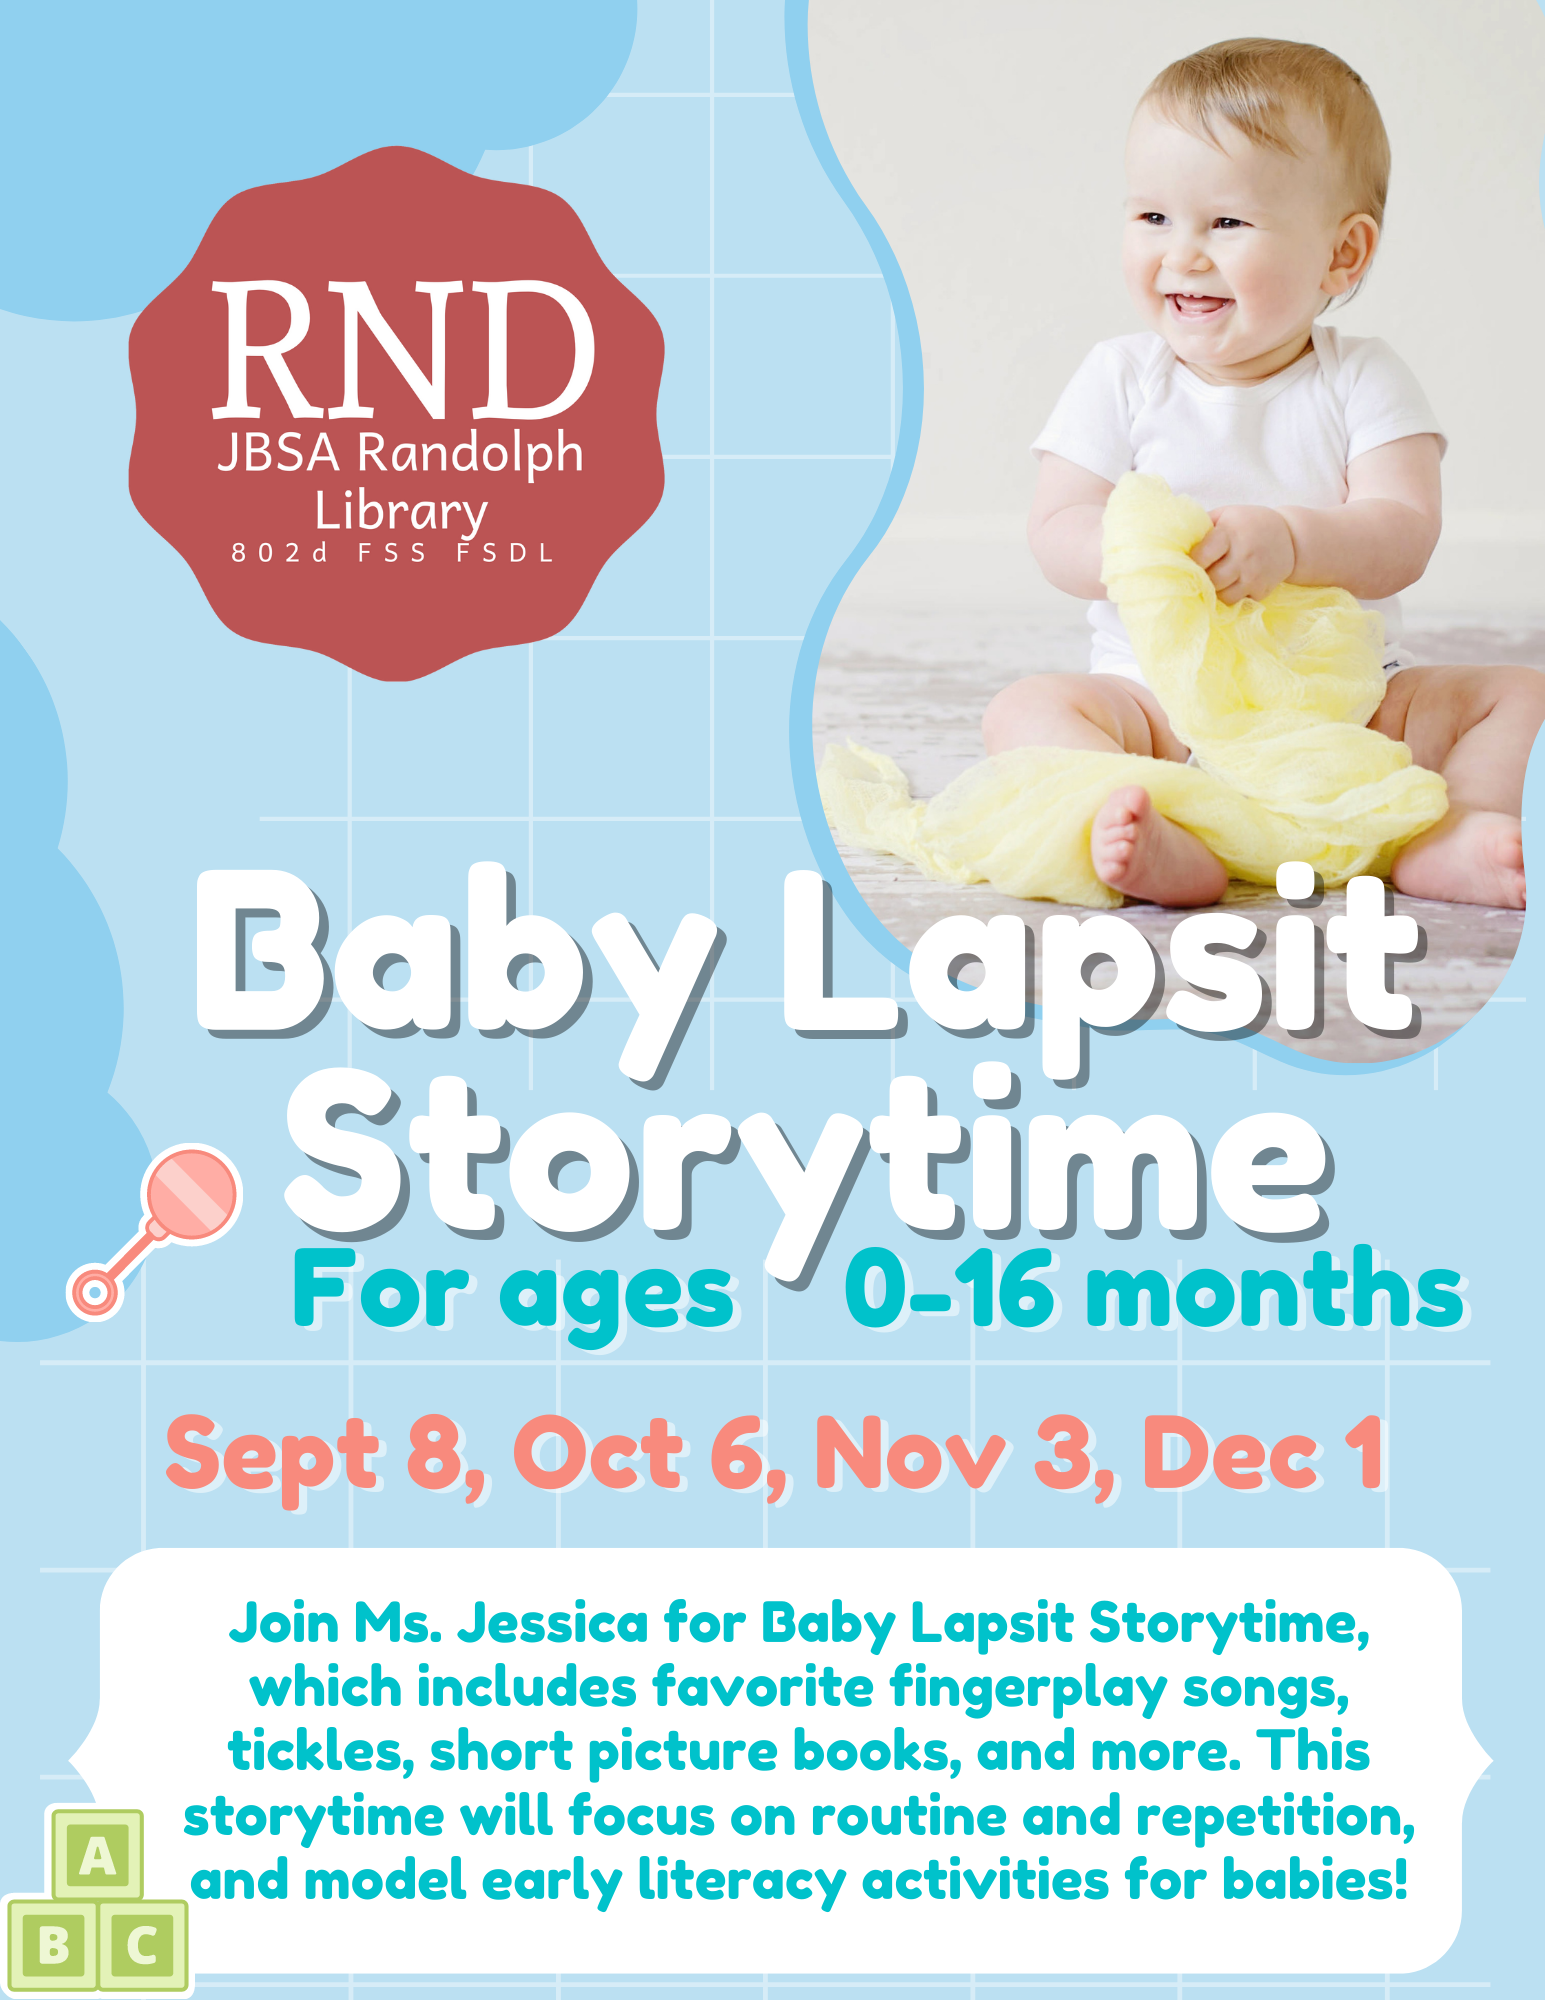 RND Library: Baby Lapsit Storytime